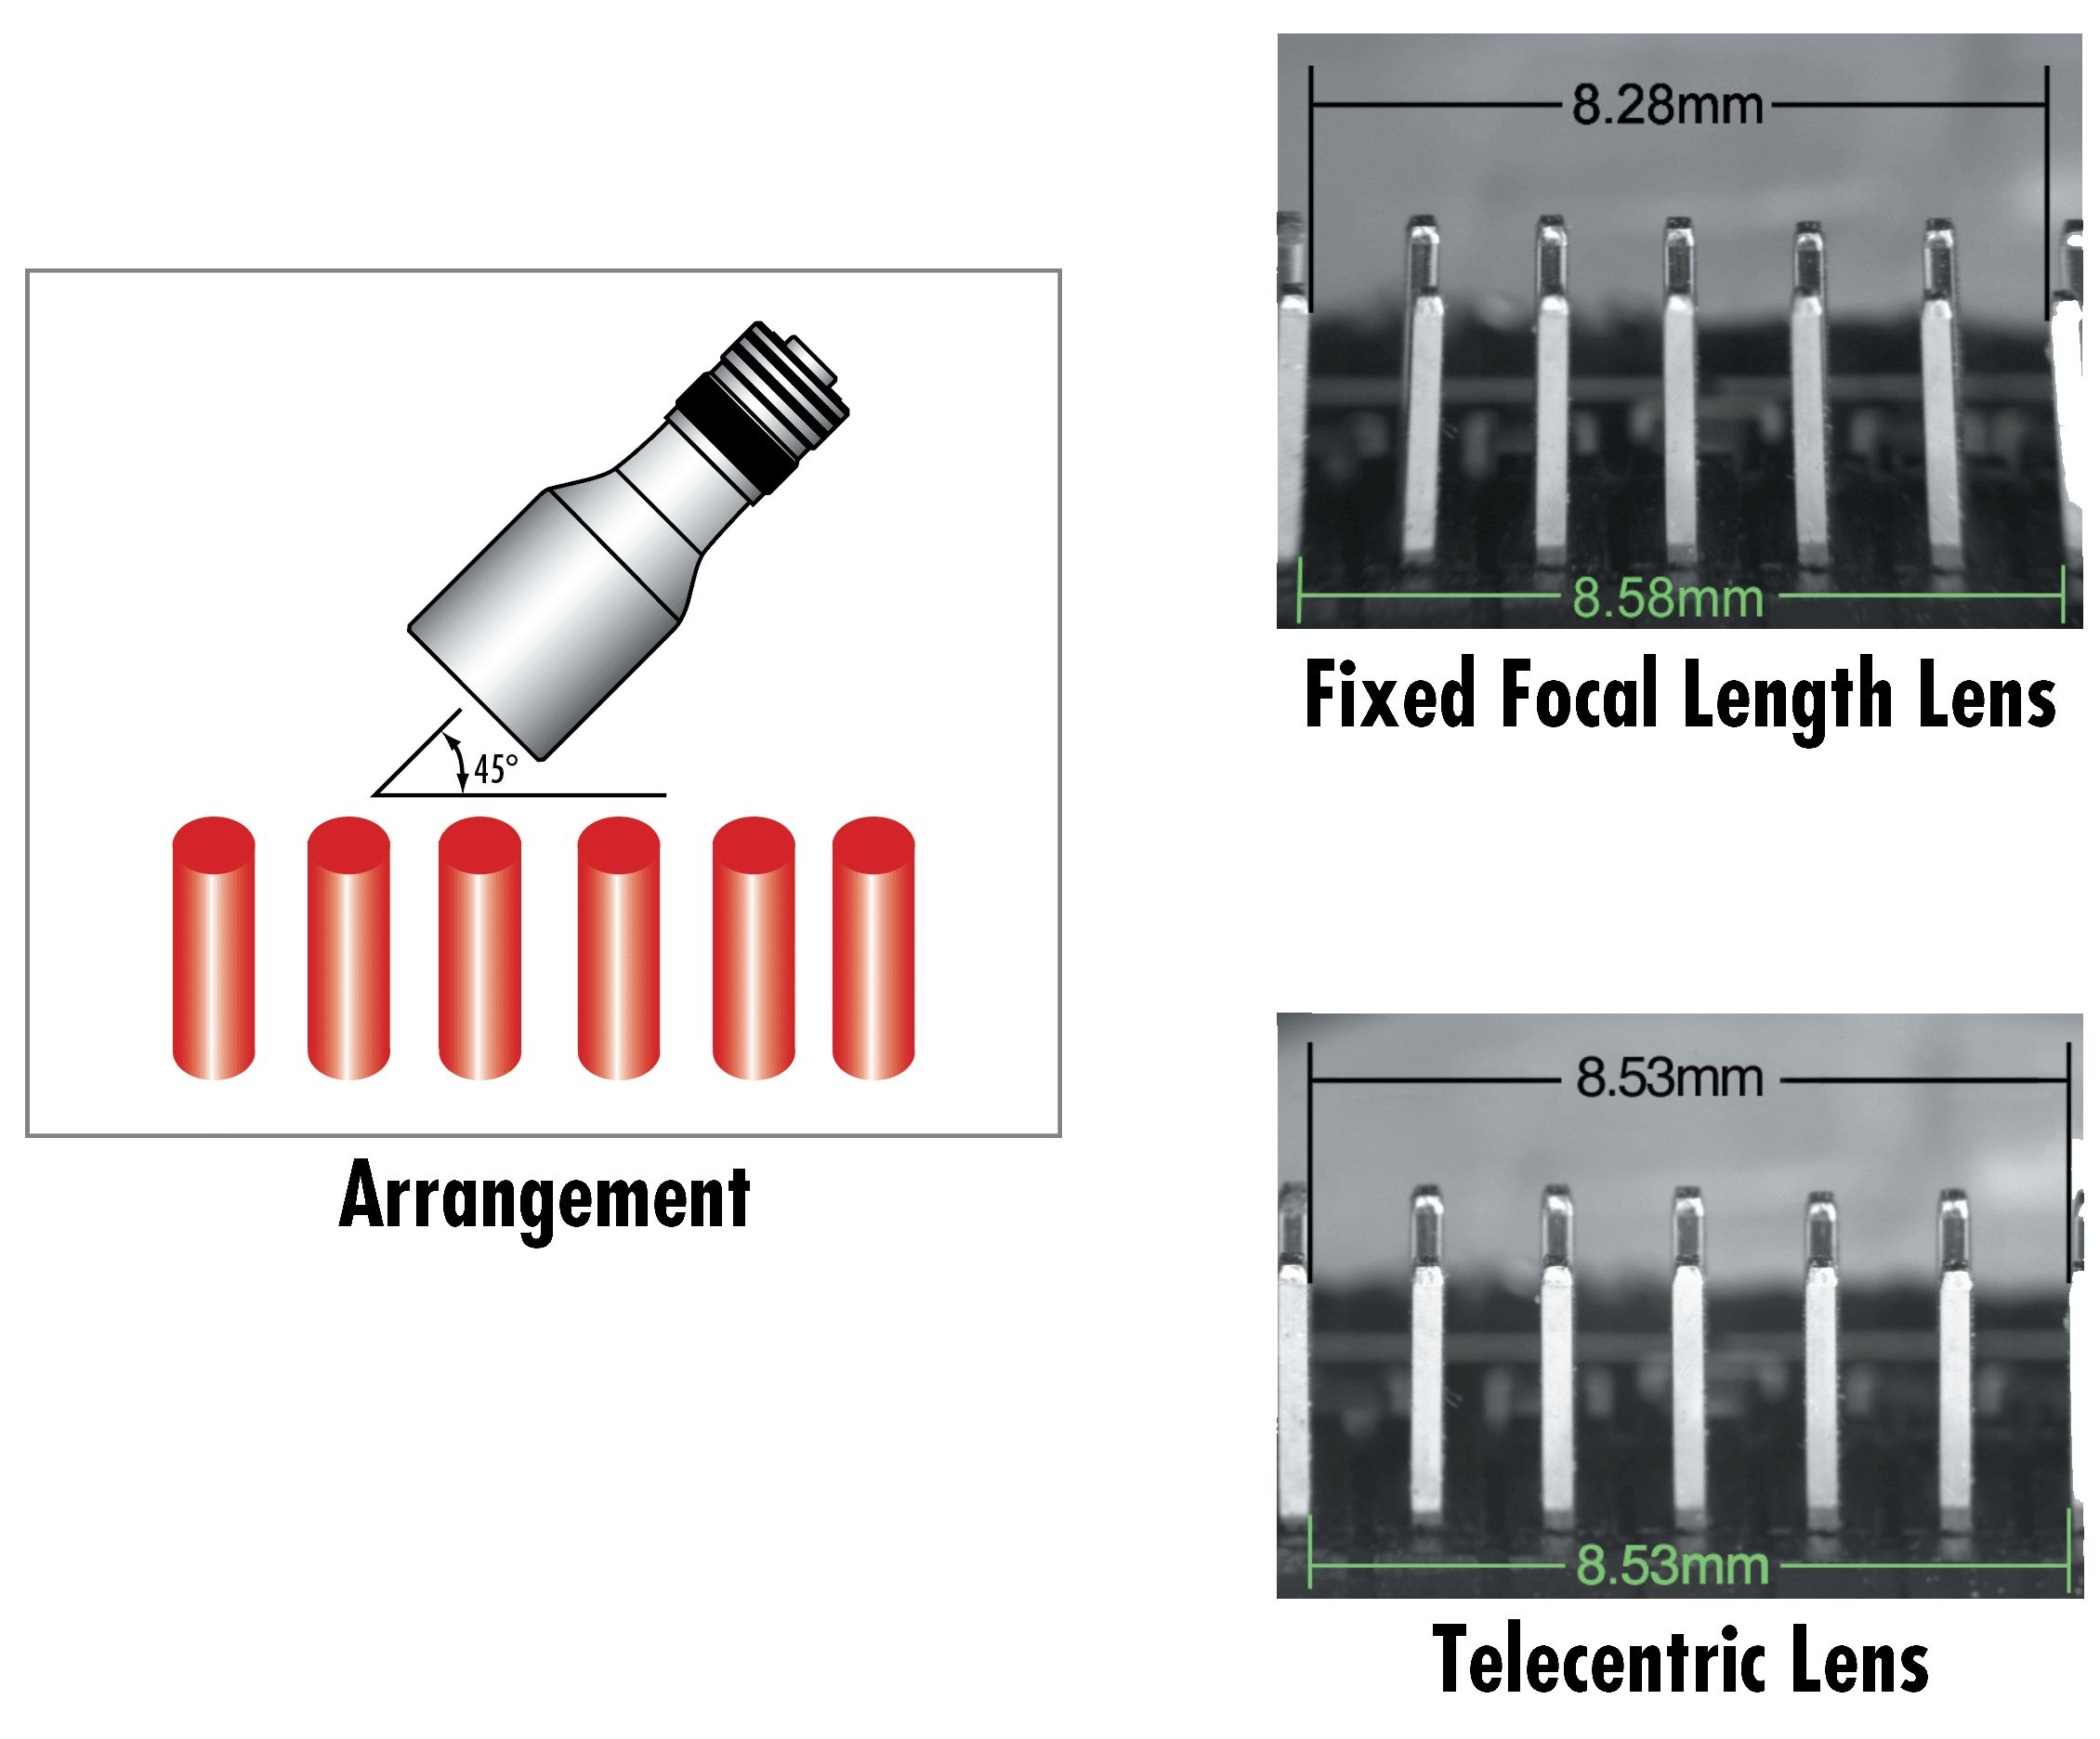 Comparison of jumpers on a circuit board. Figure 1a shows an image that has been taken with a Fixed Focal Length Lens. Figure 1b shows an image that has been taken with a Telecentric Lens. Note that the pins do not appear bent in the telecentric image.